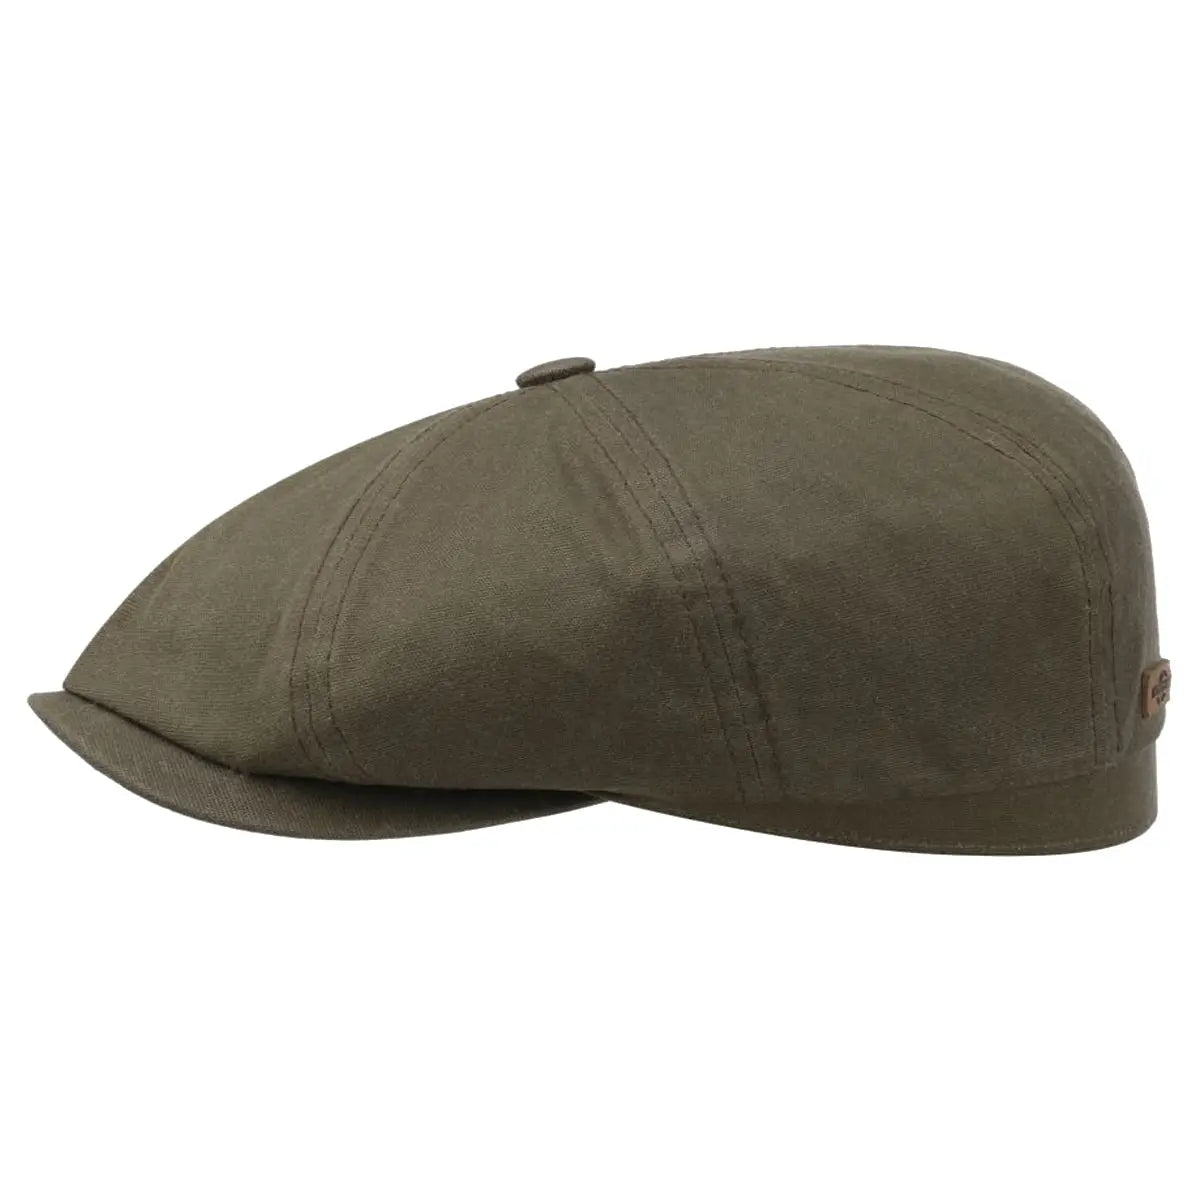 Olive Hatteras Wax Flat Cap with Ear Flaps  Stetson   